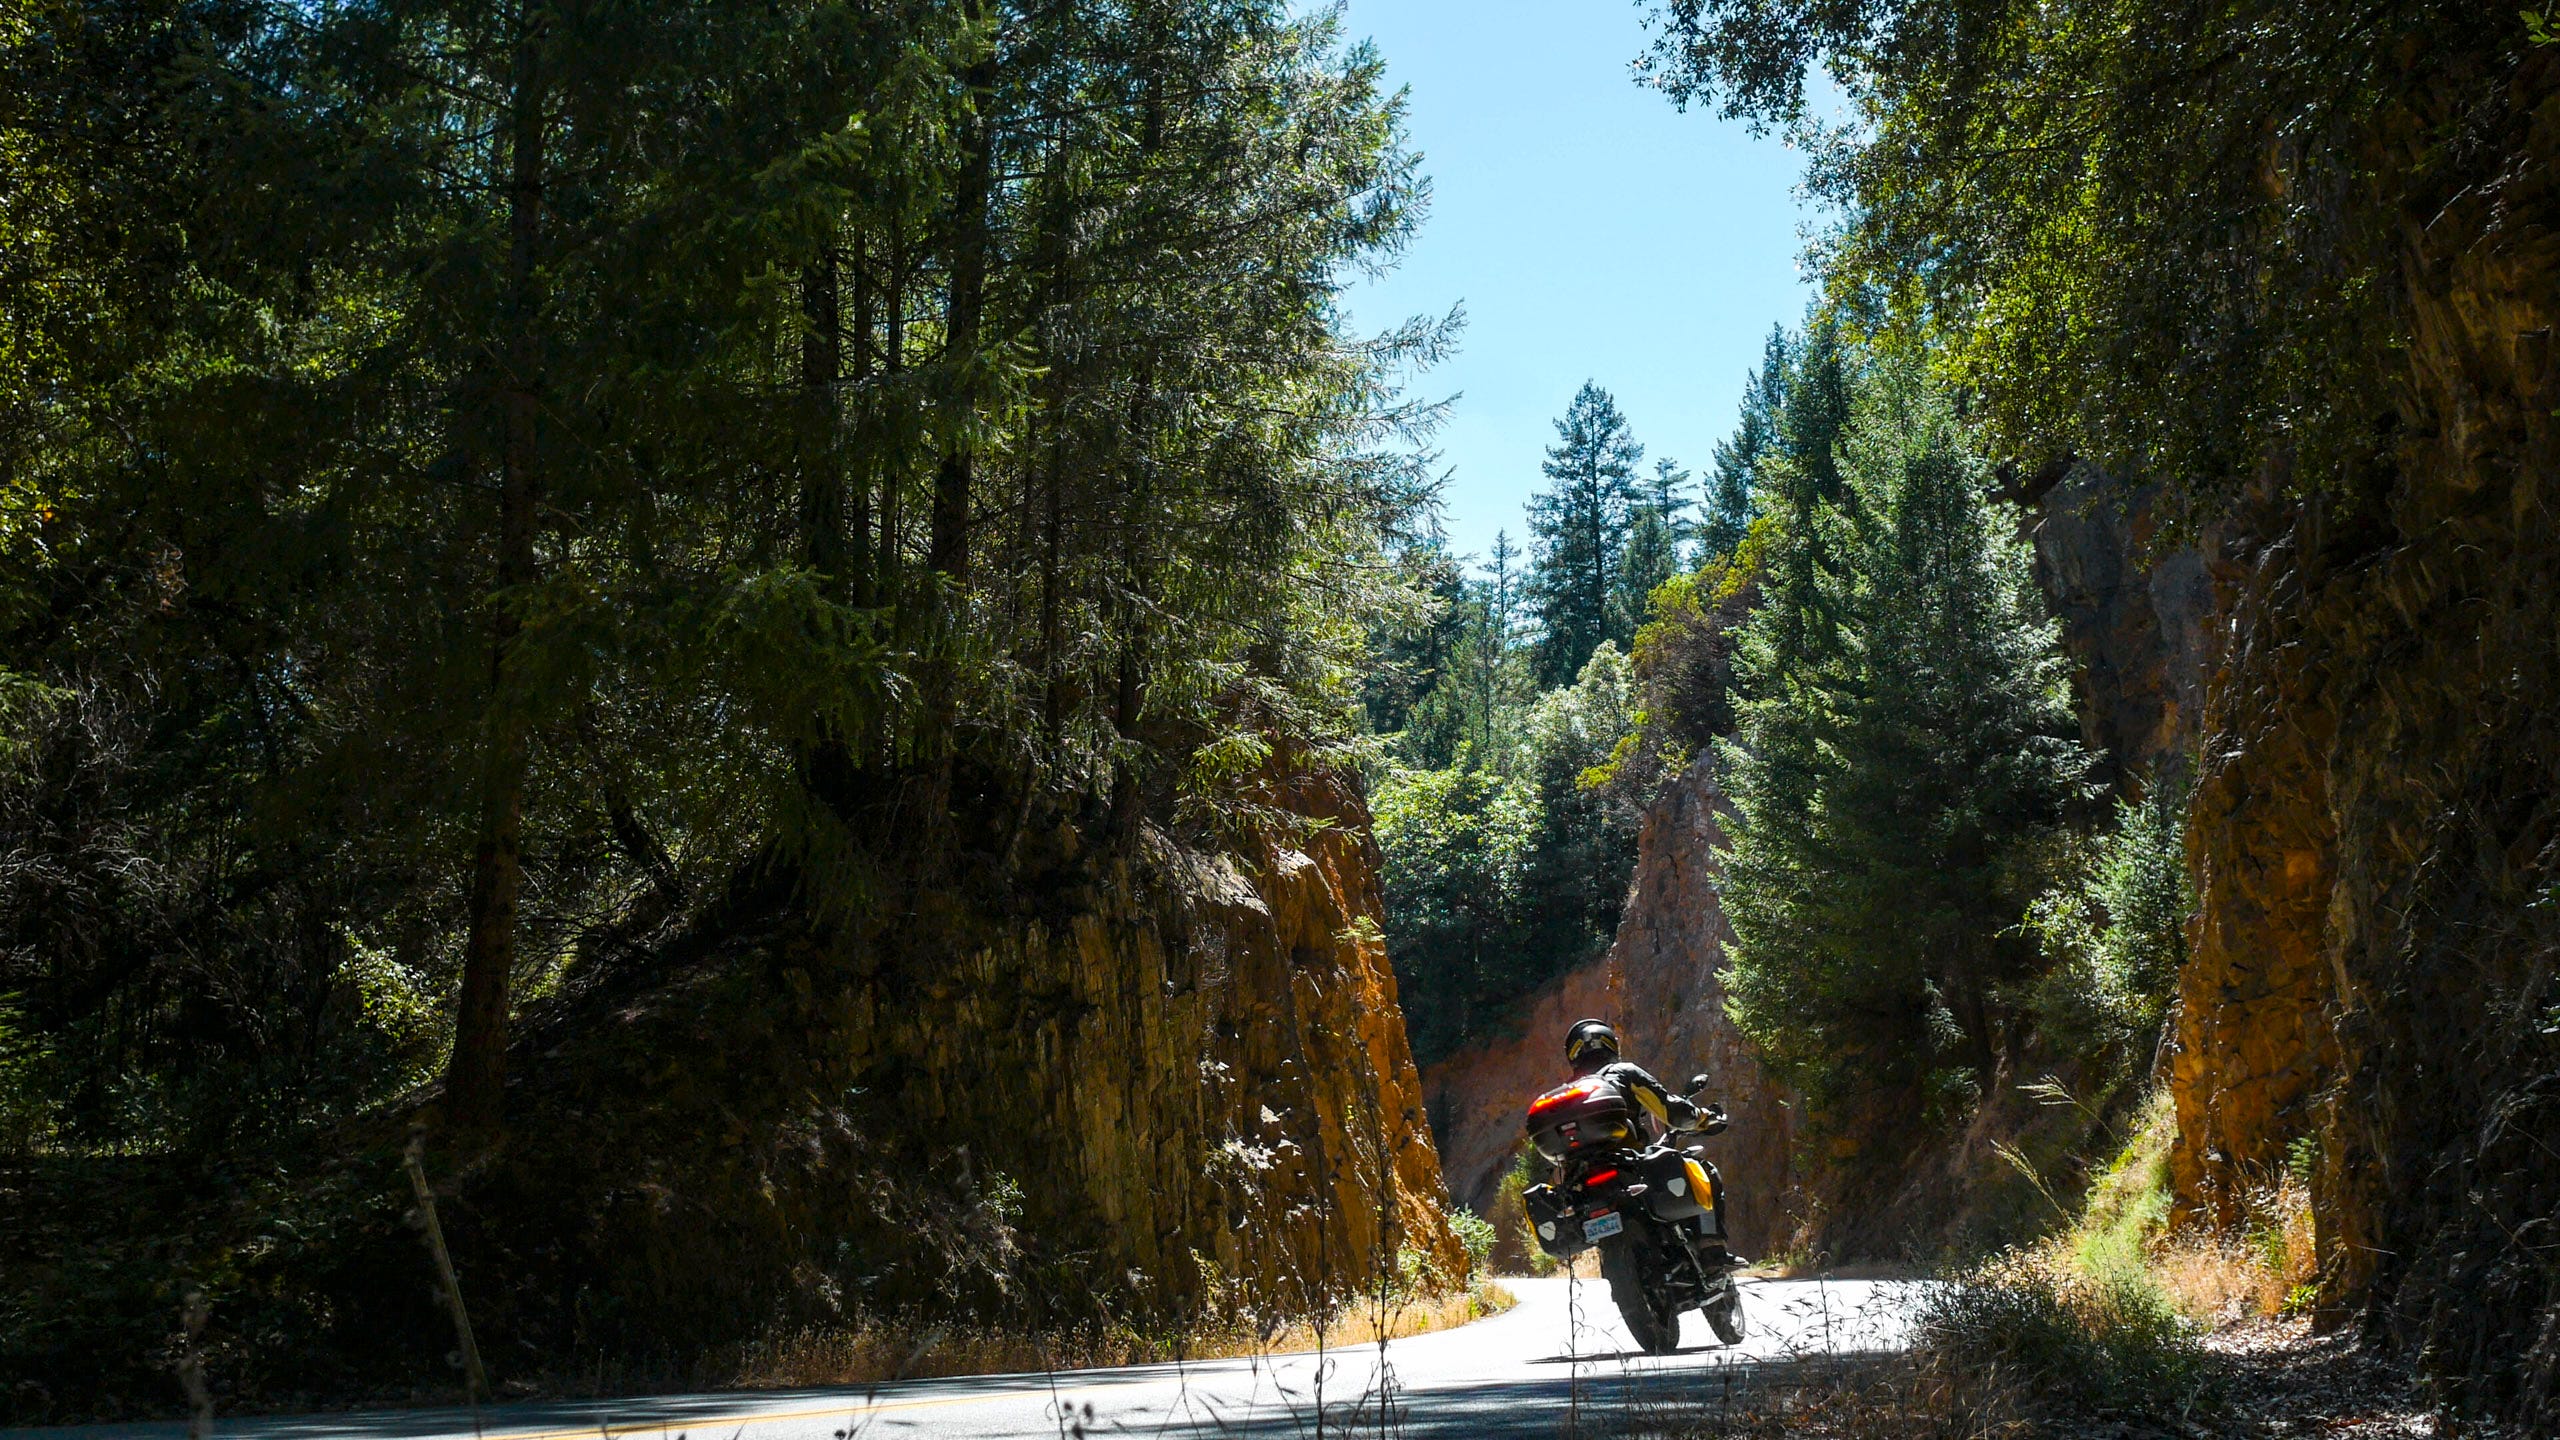 A motorcycle rider leans into a left hand bend on a road that cuts through a thick evergreen forest. The road is cut through rock which lines the roadway, above with the trees grow. Much of the photo is in shade while other parts, including the rider, is in bright sun.